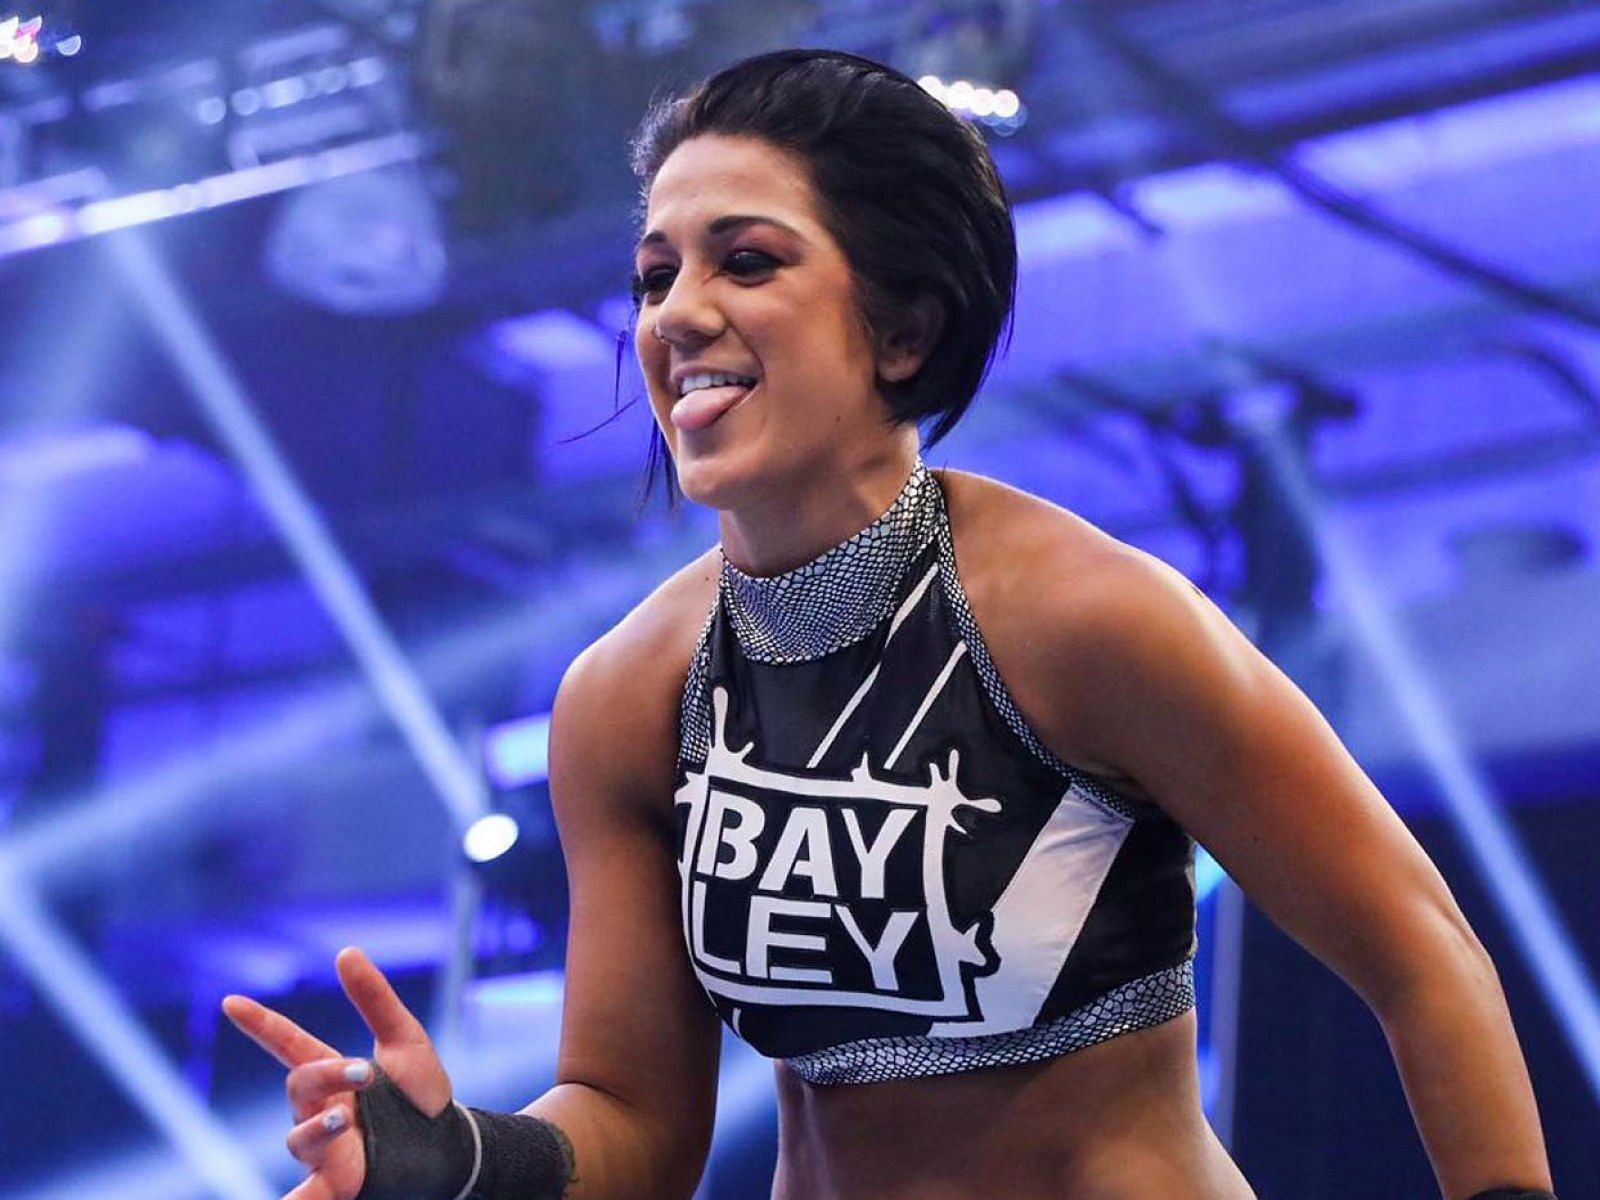 Bayley is expected to return either at or the night after WrestleMania